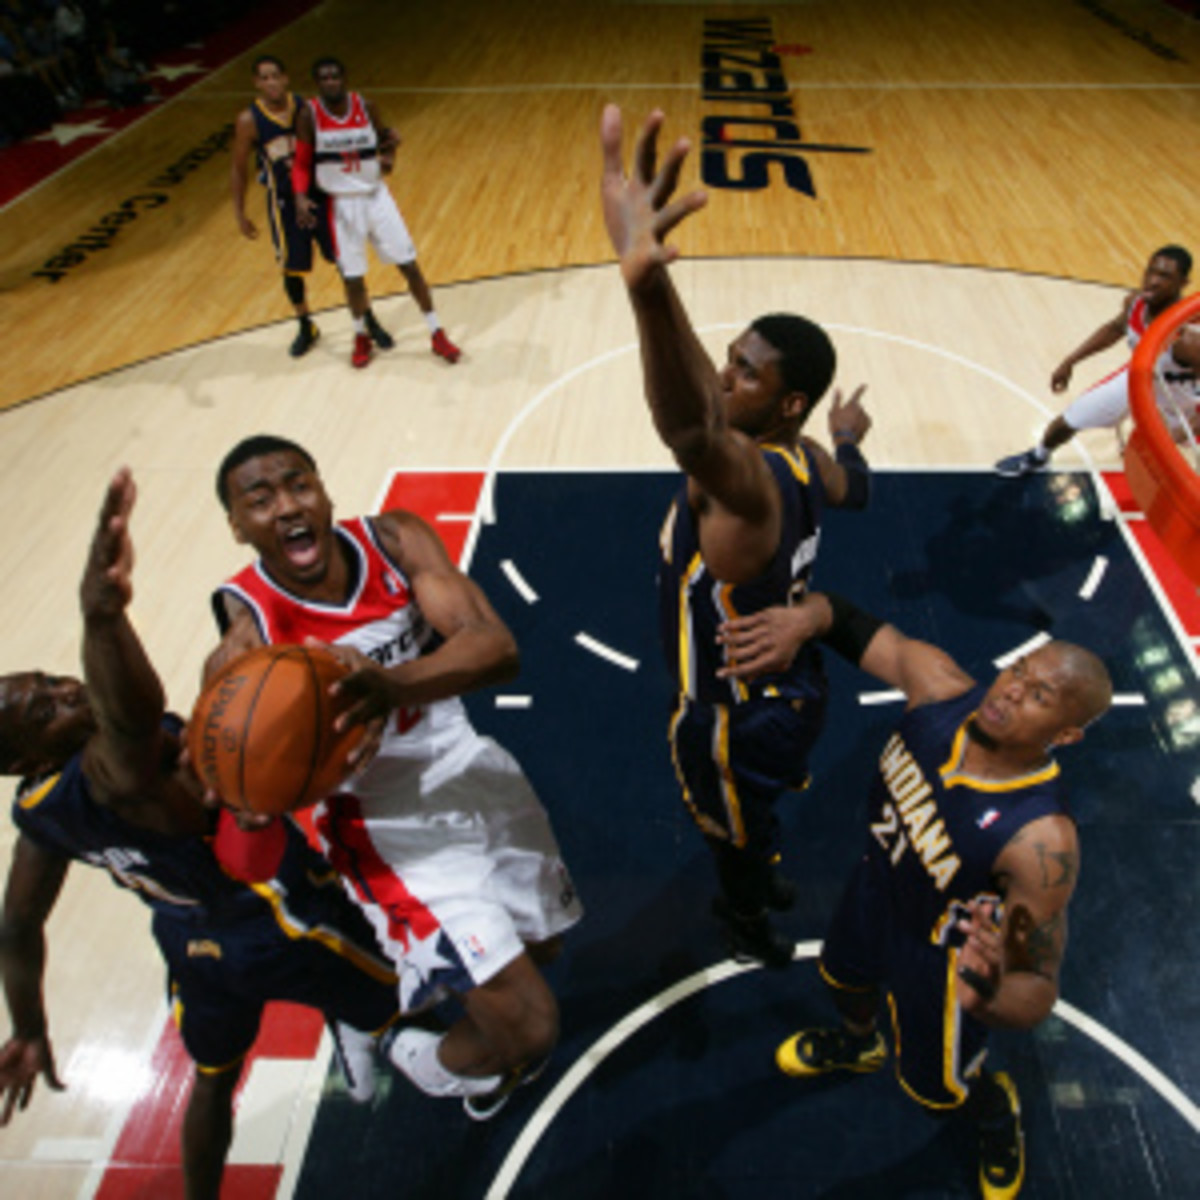 John Wall and Roy Hibbert cleared up some things after a exchange of words through the media. (Ned Dishman/Getty Images)